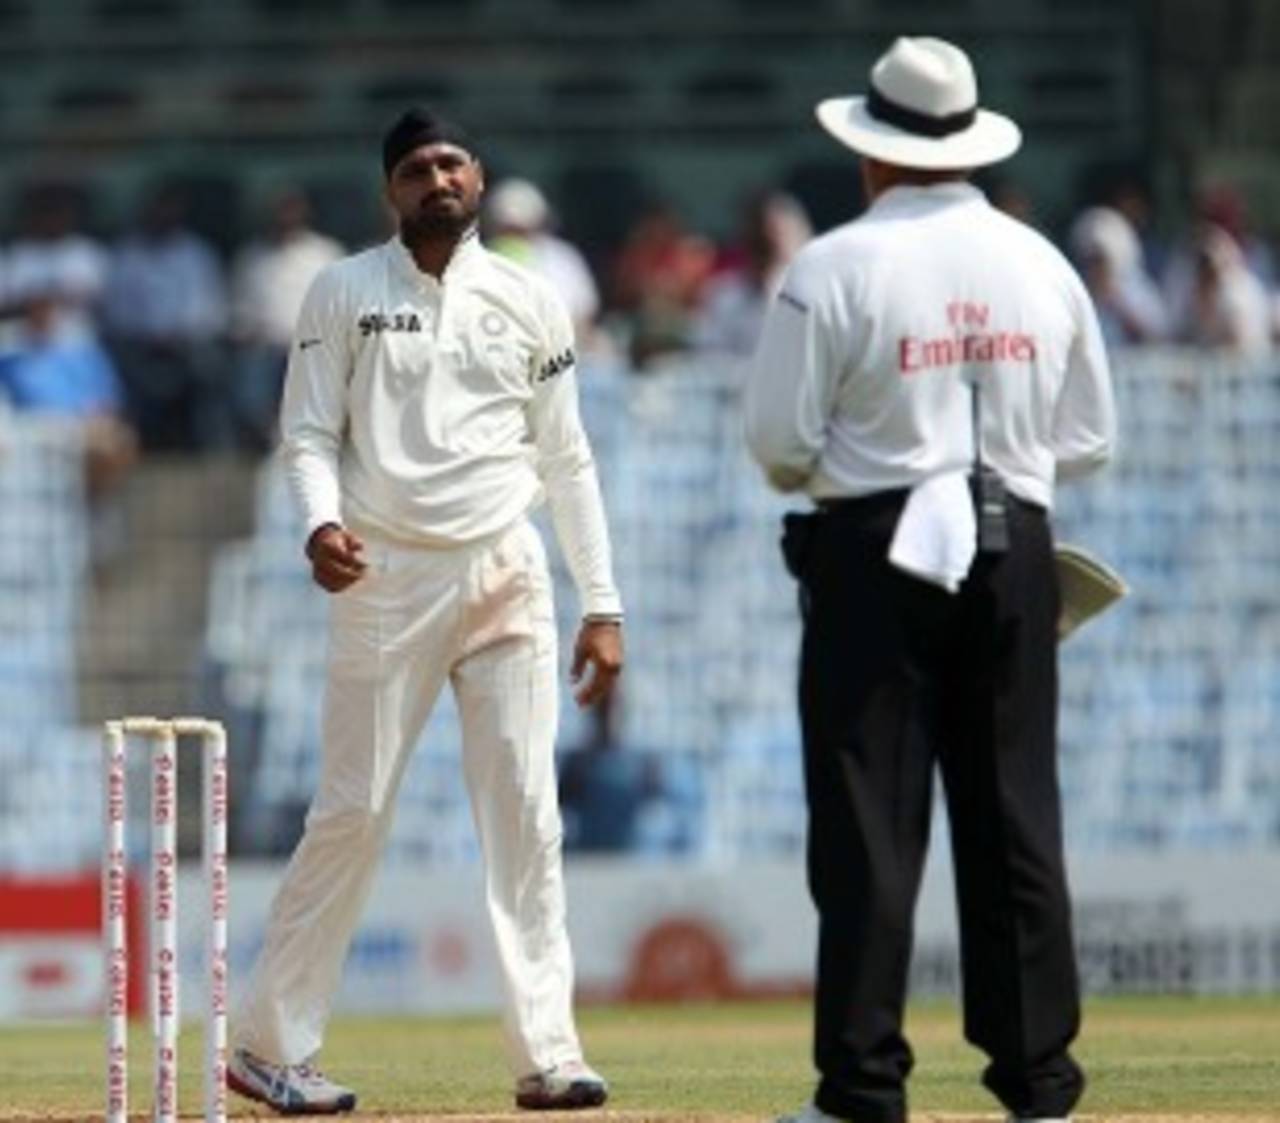 Harbhajan Singh: "I bowled pretty well and I'm quite happy with the way I bowled on this wicket"&nbsp;&nbsp;&bull;&nbsp;&nbsp;BCCI